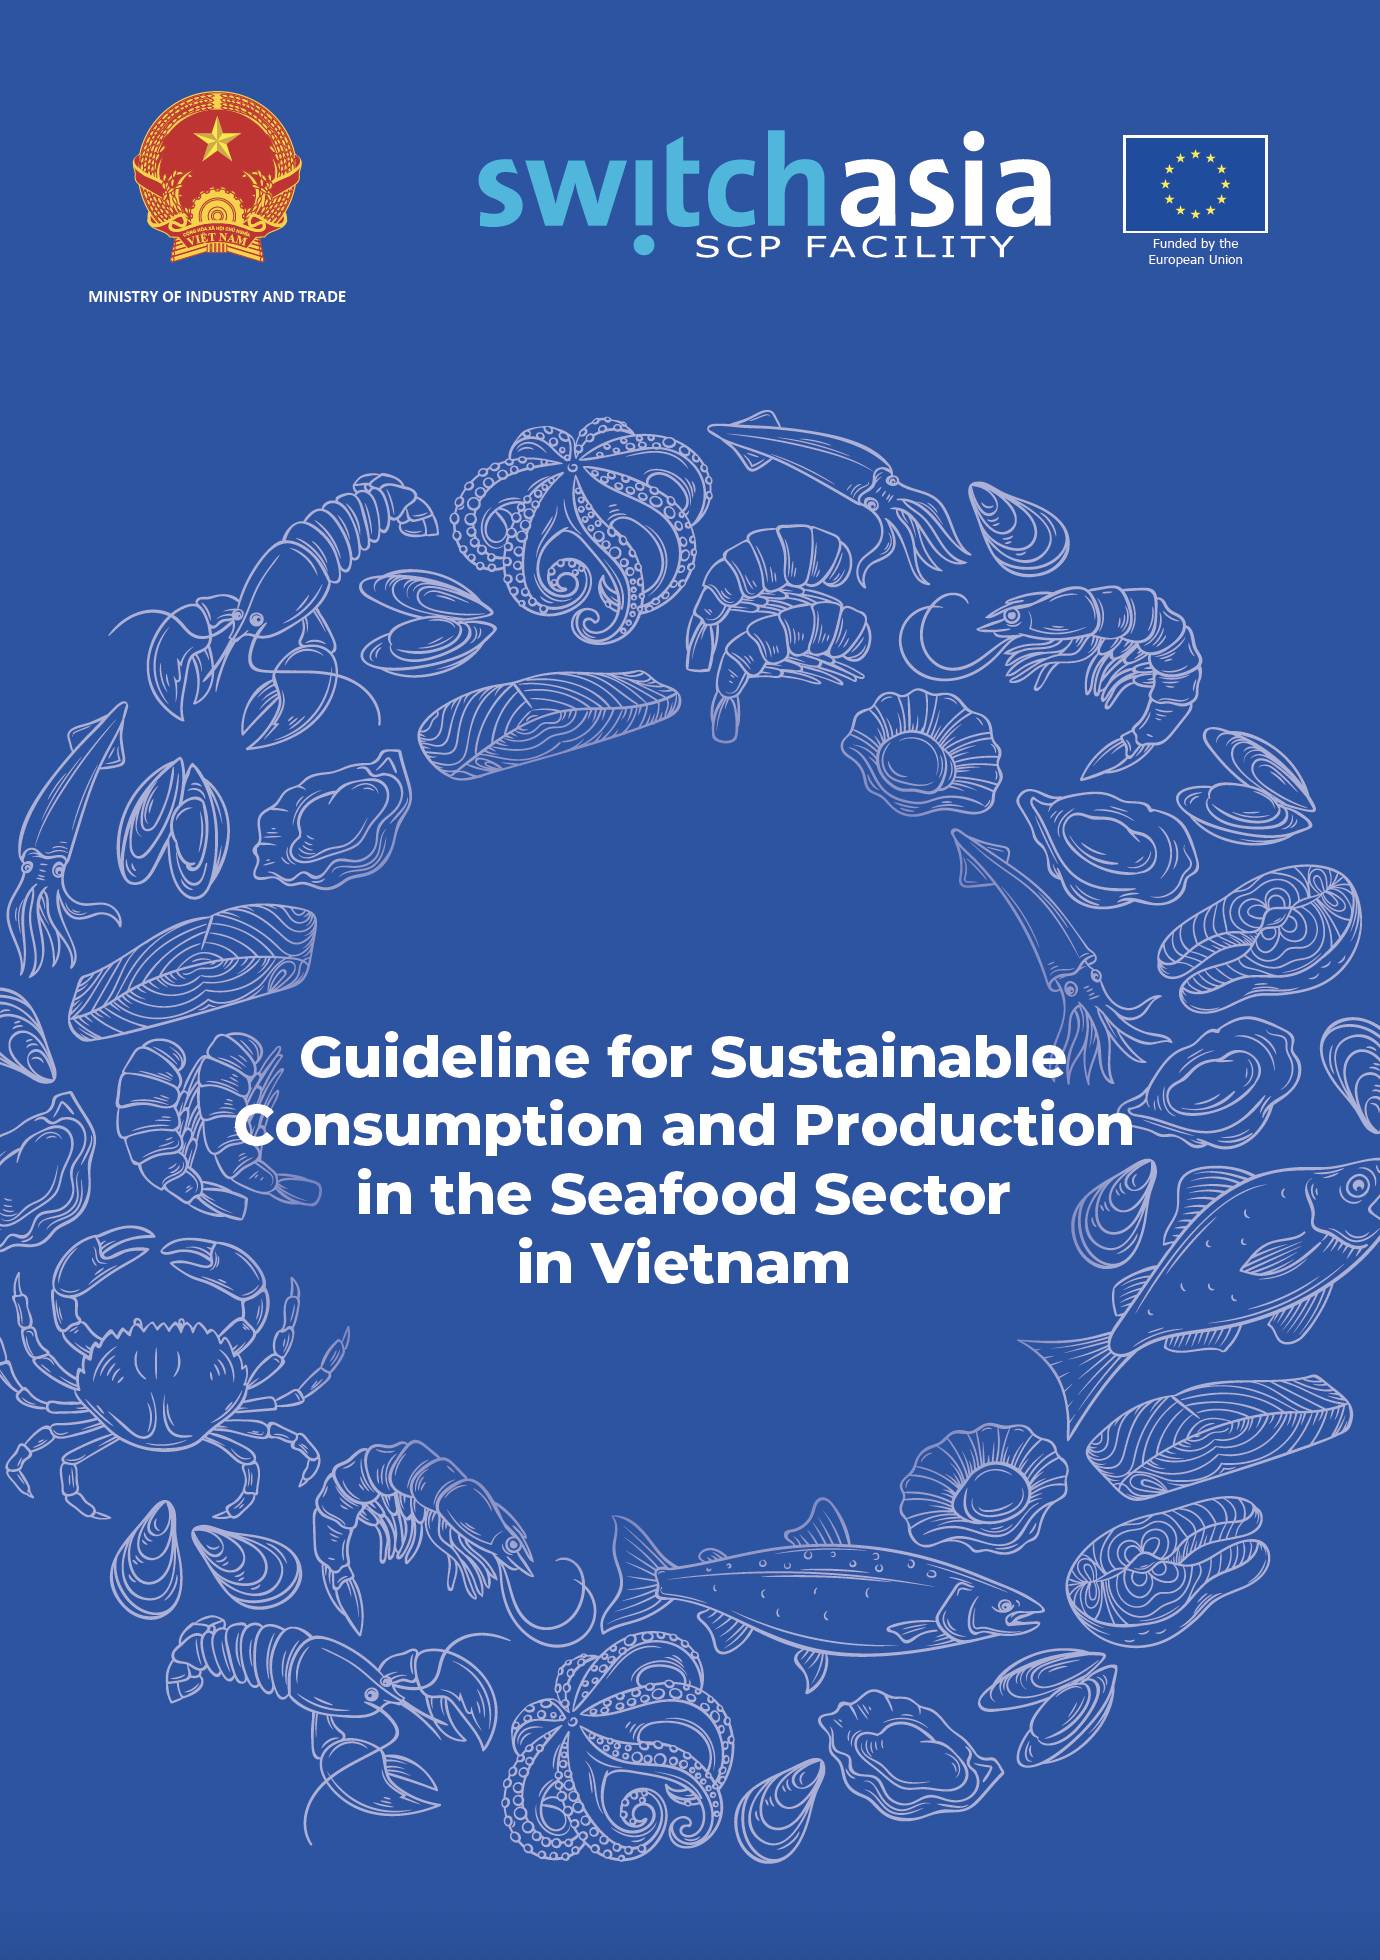 Guideline for Sustainable Consumption and Production in the Seafood Sector in Vietnam